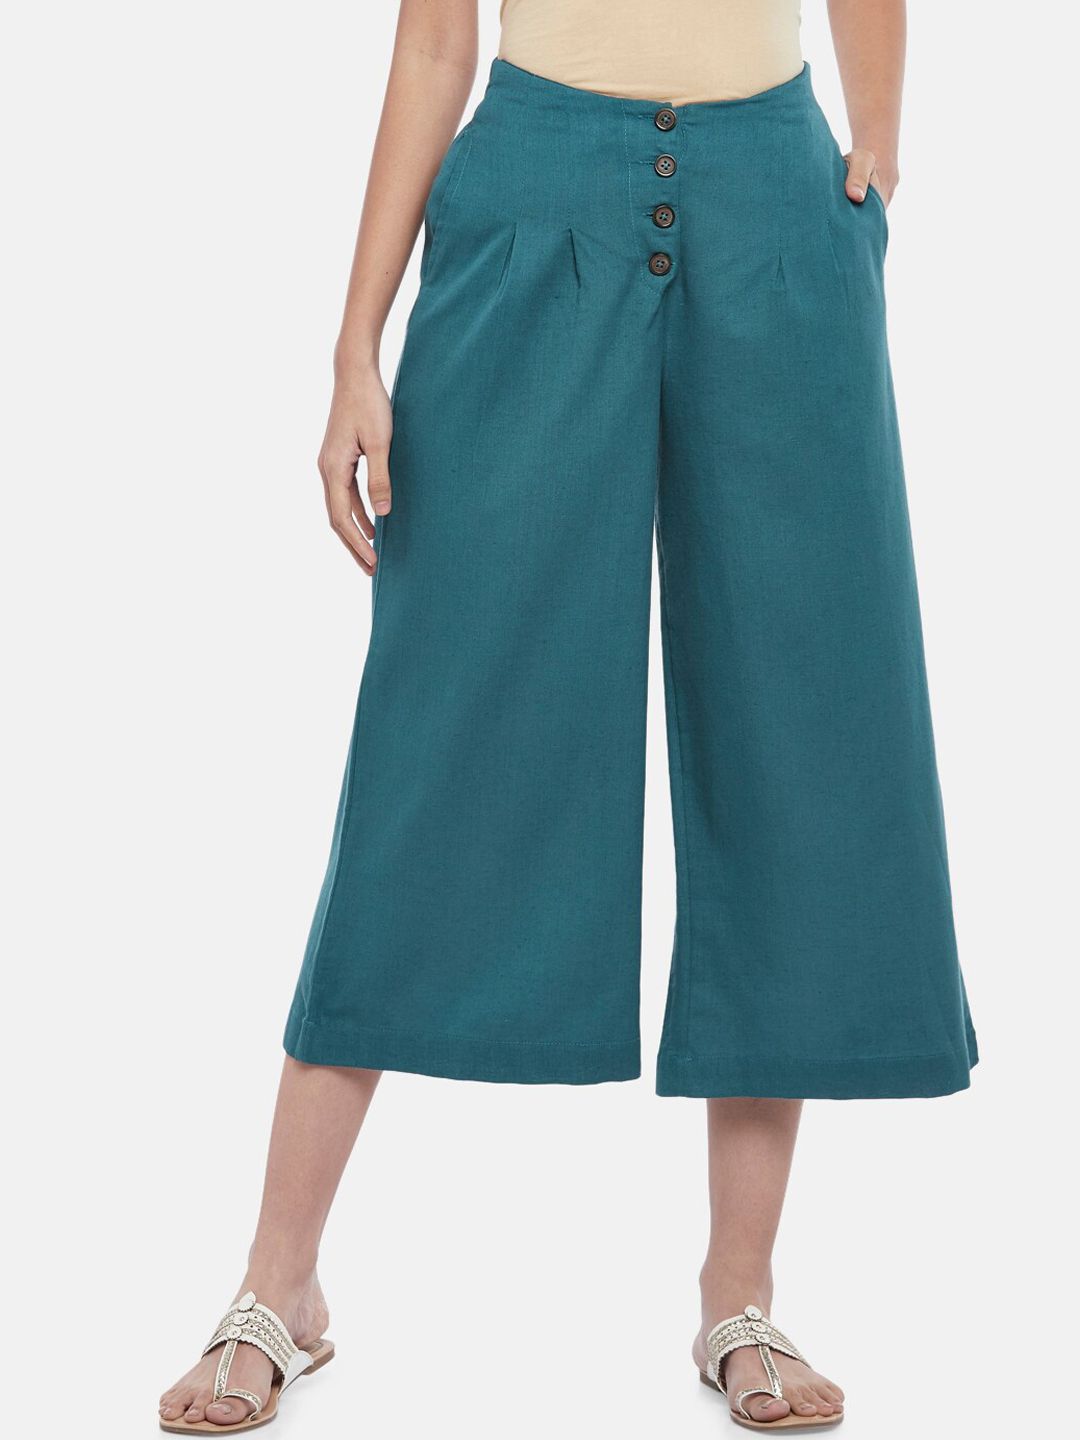 AKKRITI BY PANTALOONS Women Teal Culottes Trousers Price in India